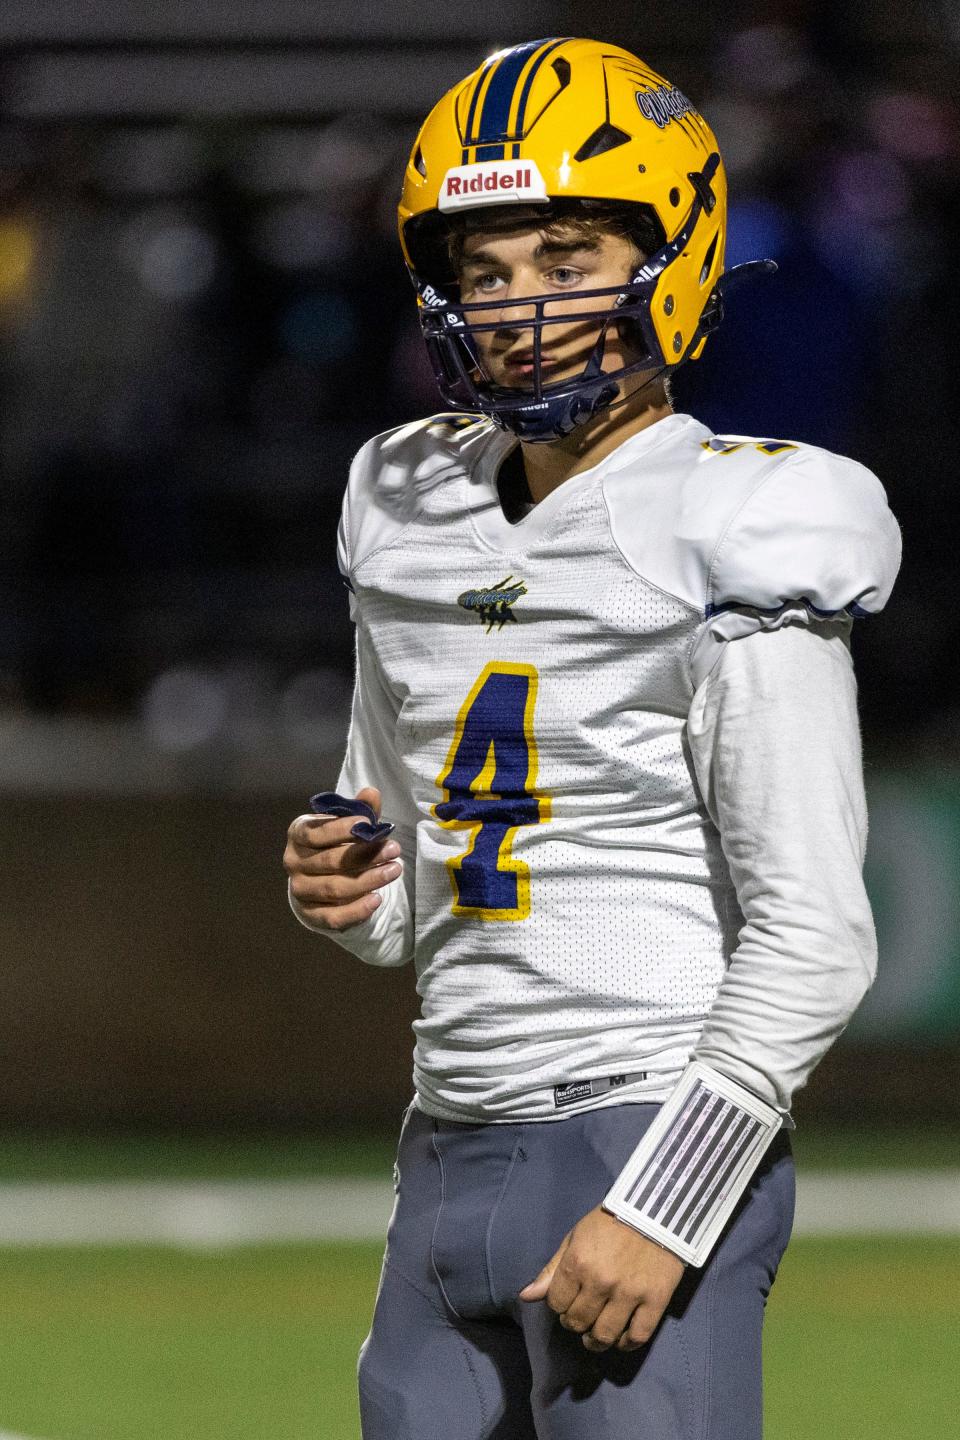 South Bend Riley’s Austin White (4) looks to the sidelines for the play during the South Bend Riley-South Bend Washington high school football game on Friday, September 23, 2022, at TCU School Field in South Bend, Indiana.